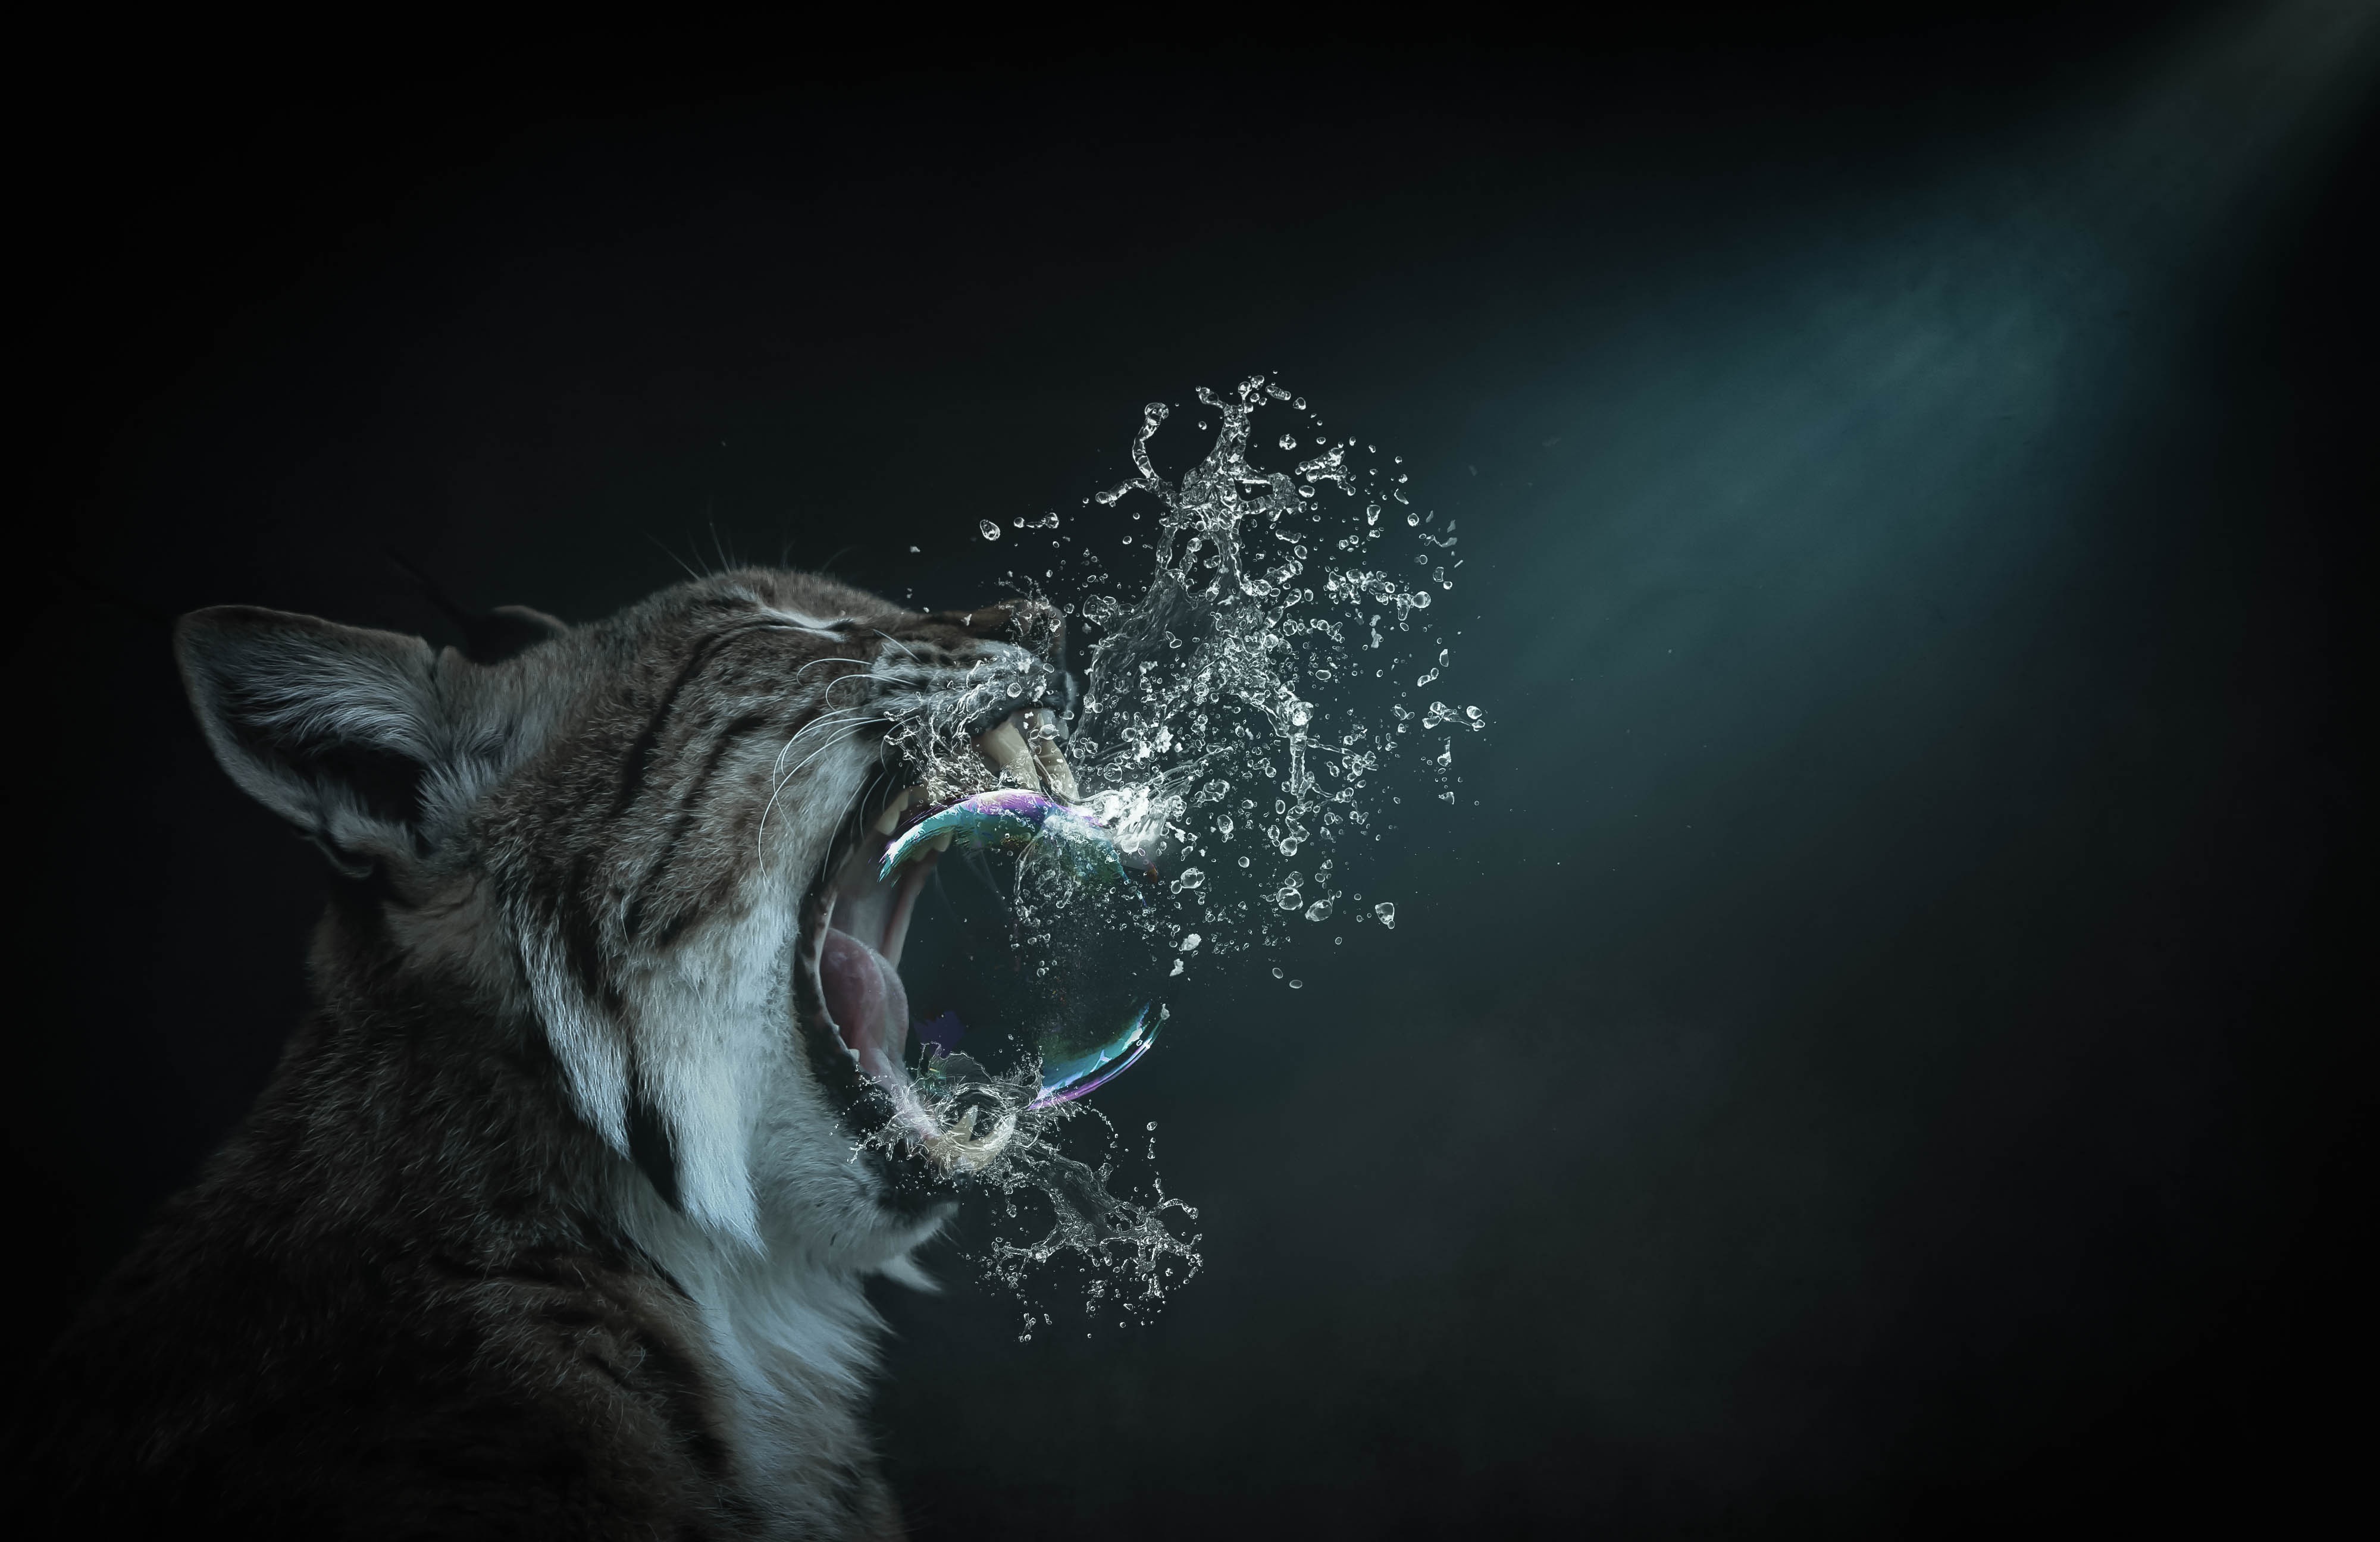 A Bubble for a Bobcat by Willgard Krause